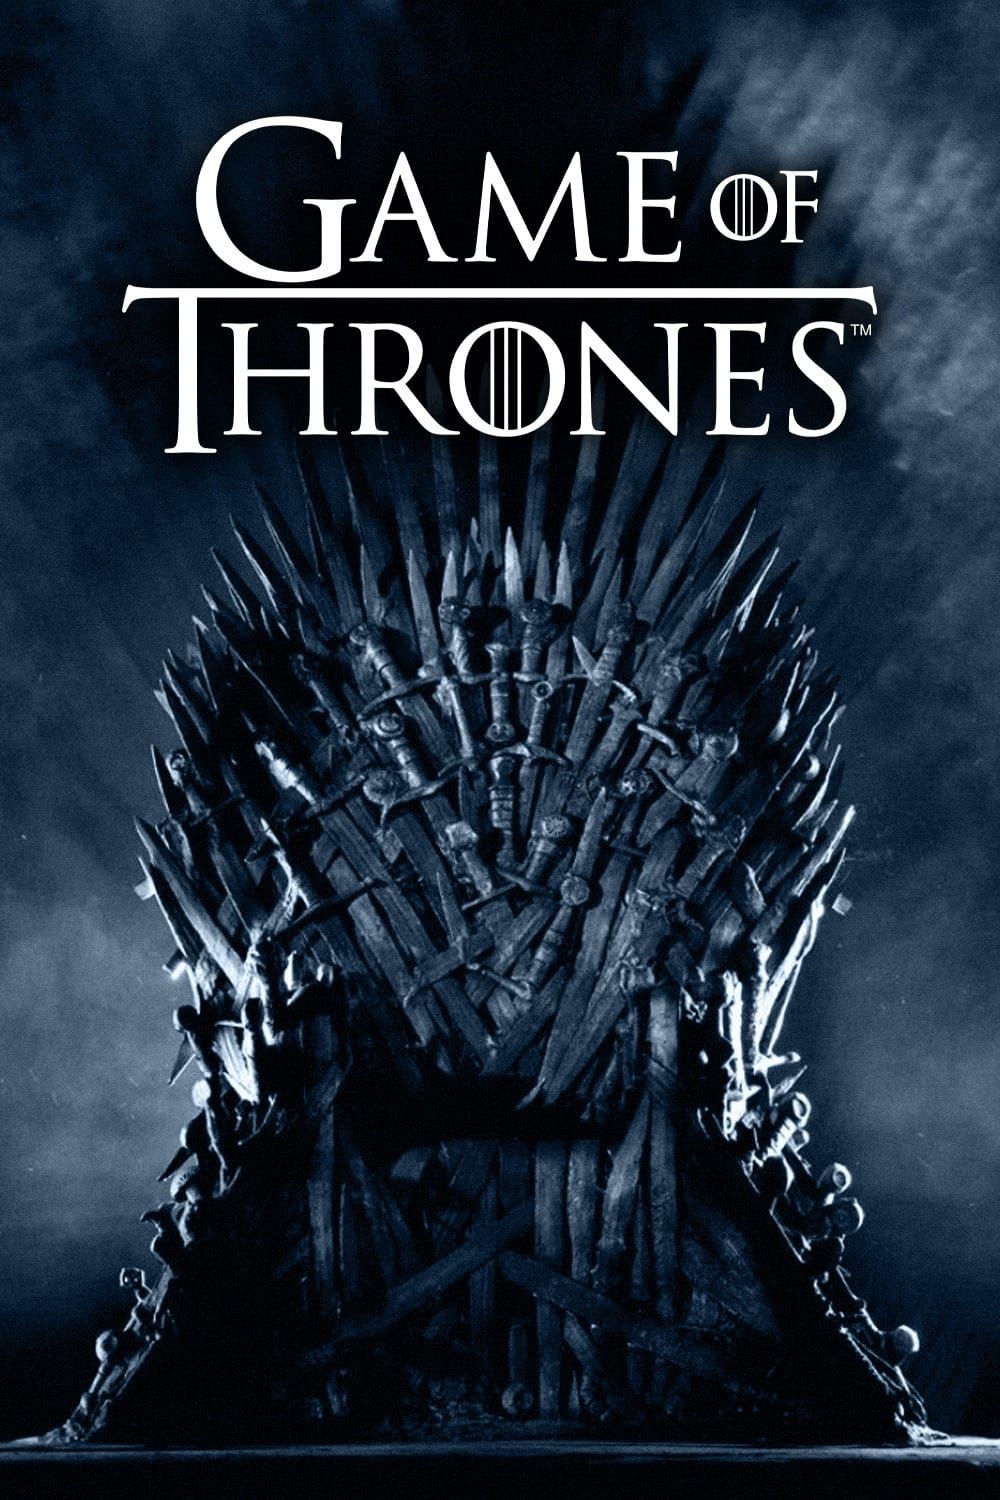 Poster Waralaba Game of Thrones